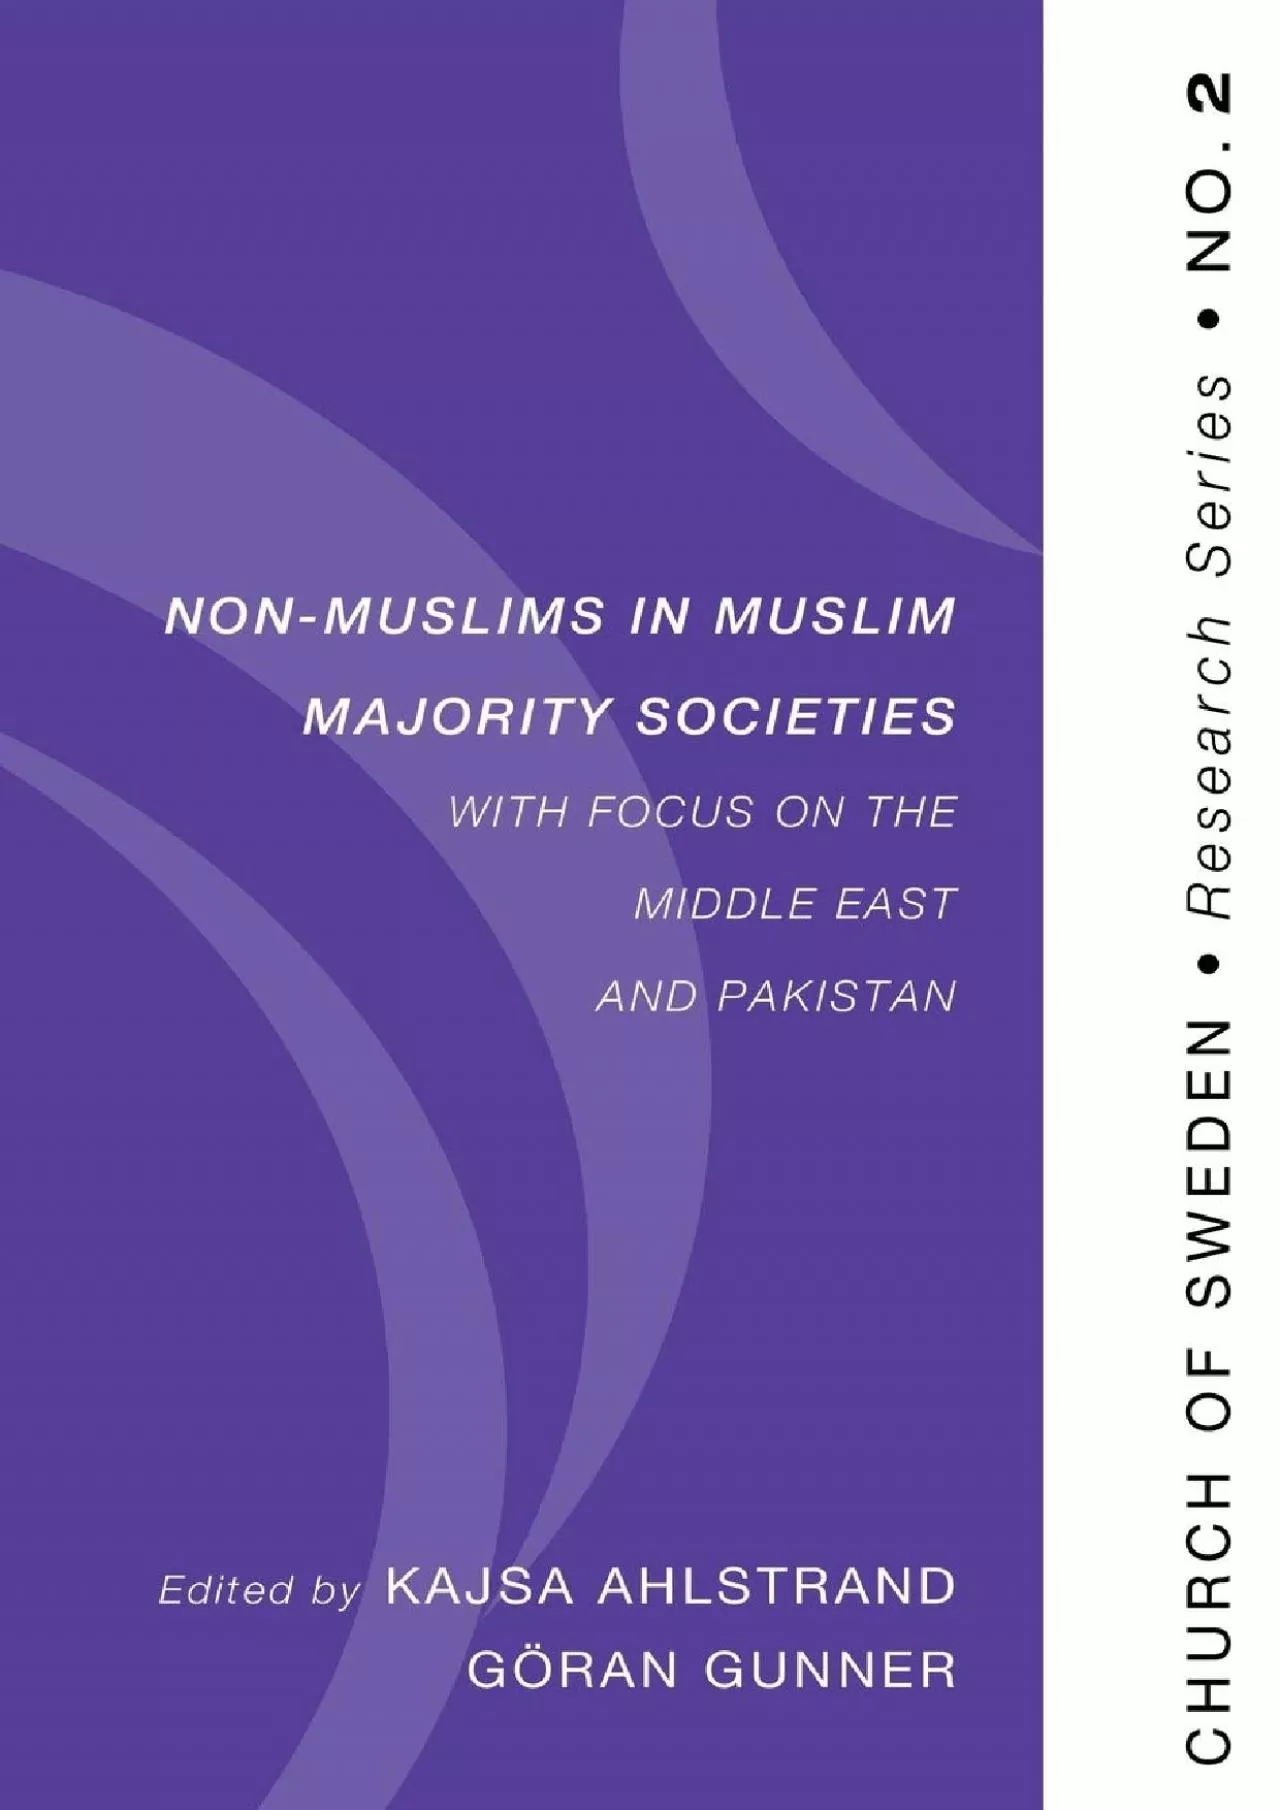 (DOWNLOAD)-Non-Muslims in Muslim Majority Societies - With Focus on the Middle East and